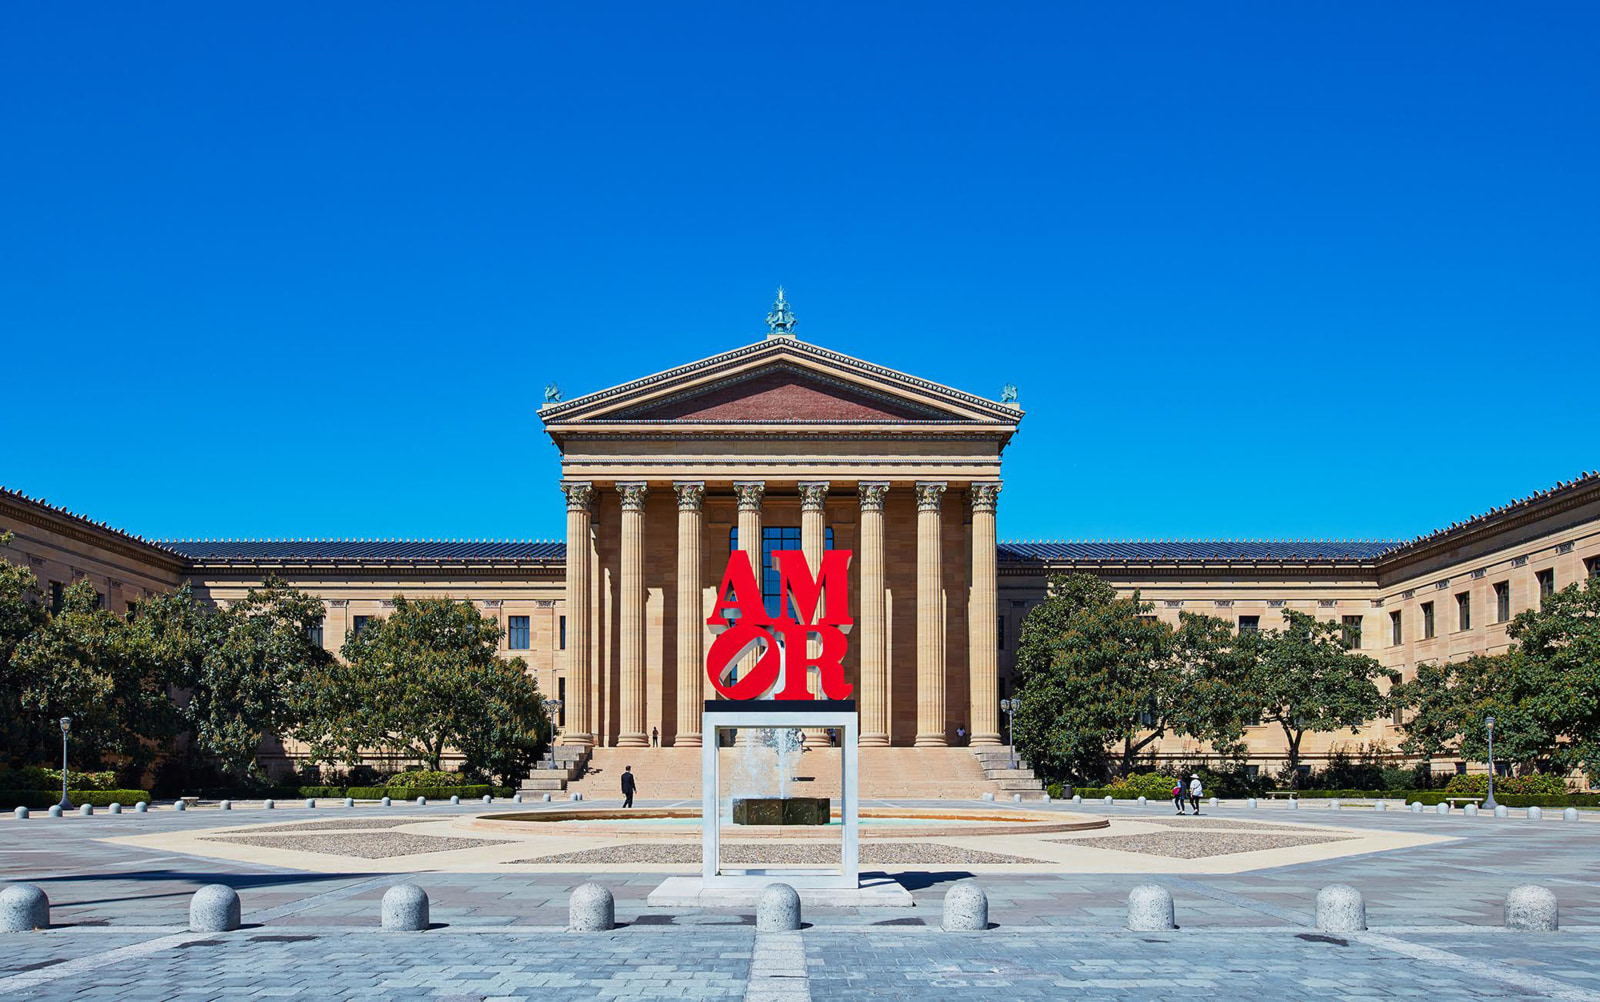 Indiana&amp;rsquo;s sculpture AMOR (1998) installed outside the Philadelphia Museum of Art in September 2015, on the occasion of the visit of Pope Francis I to Philadelphia. Photo: Tom Powel Imaging